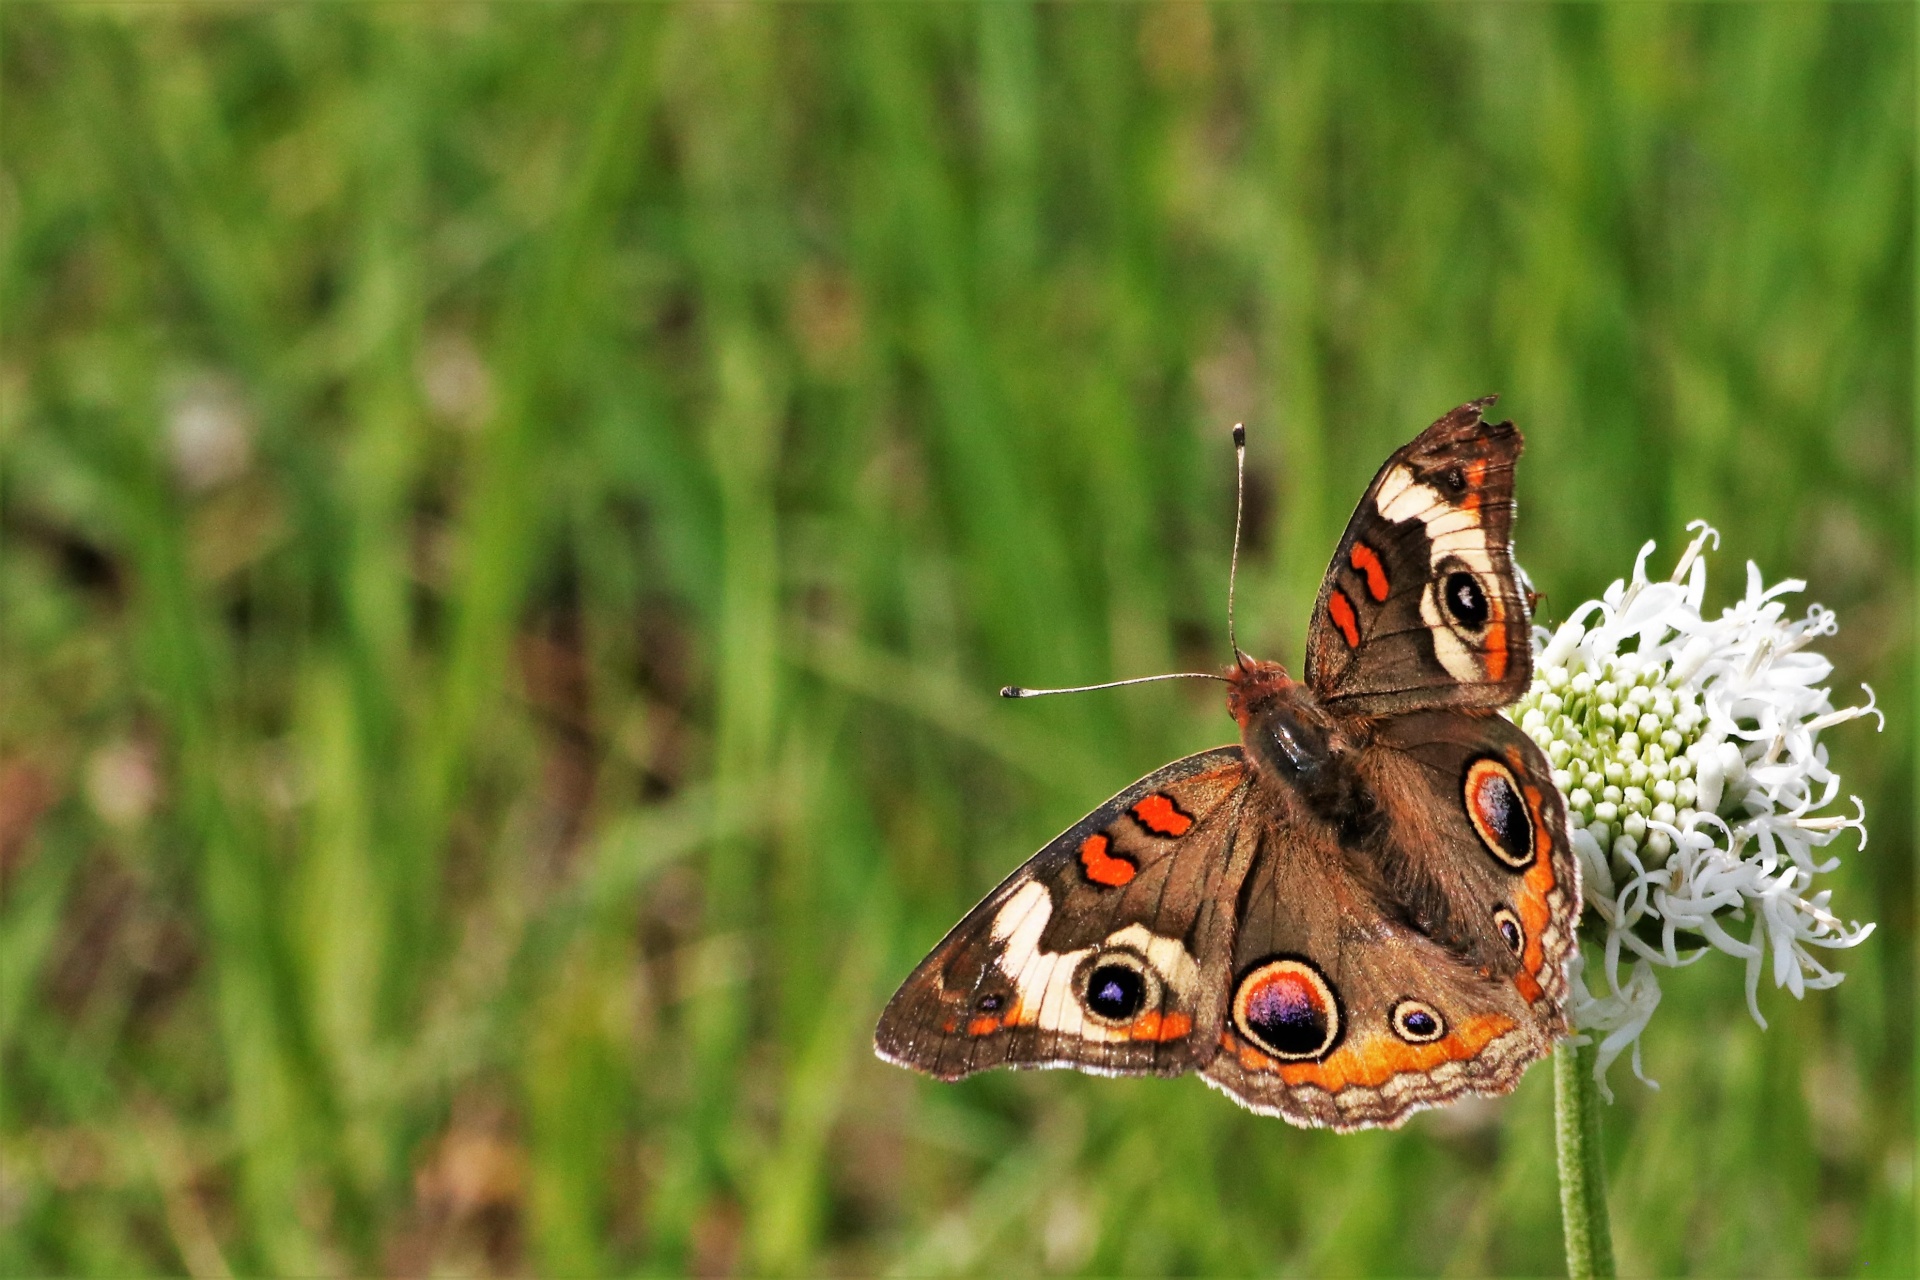 Close-up of a beautiful common buckeye butterfly, with wings open, sipping nectar from a white puffball wildflower, on a blurred green background, with room for text.